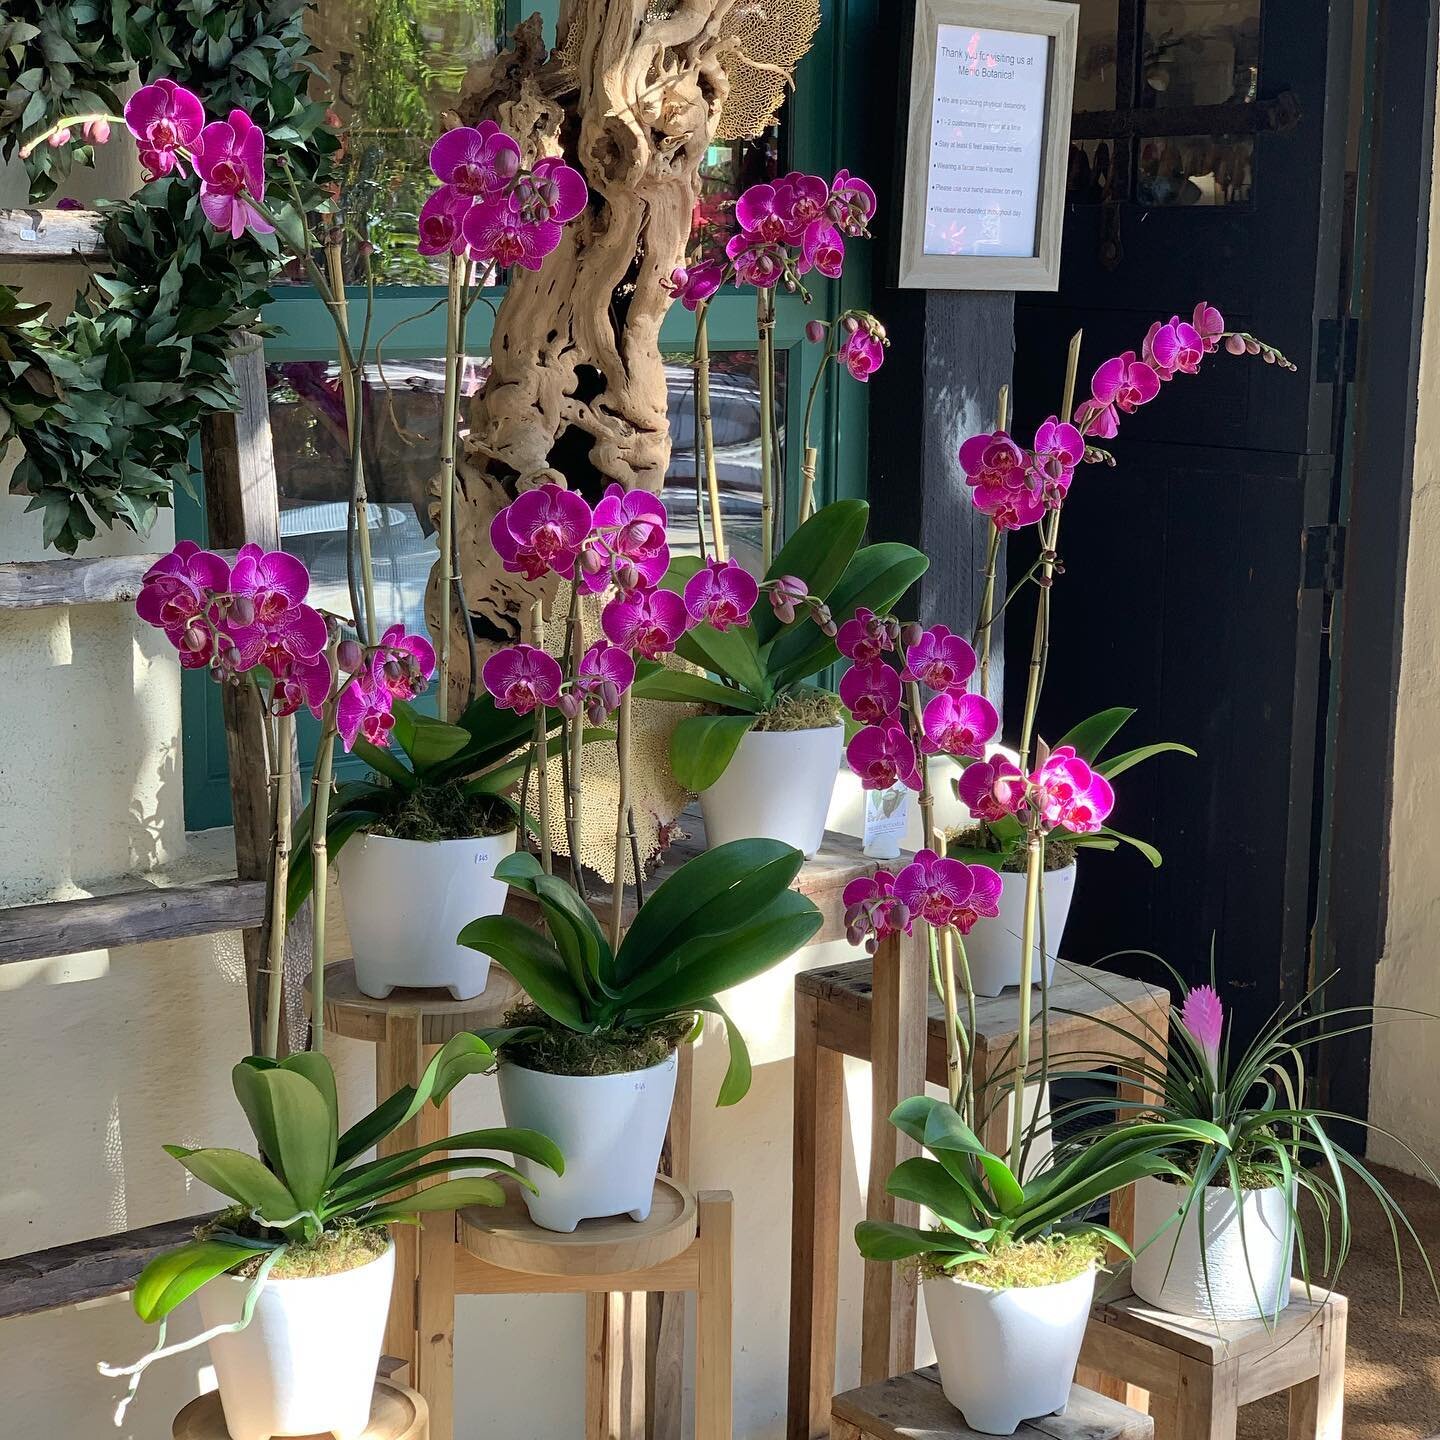 Last weeks orchid display was amazing - all sold out but more blooming orchids to come every week

#blooming orchid plants#menlobotanica#alliedarts#orchids#modernorchids#menlopark#paloalto#atherton